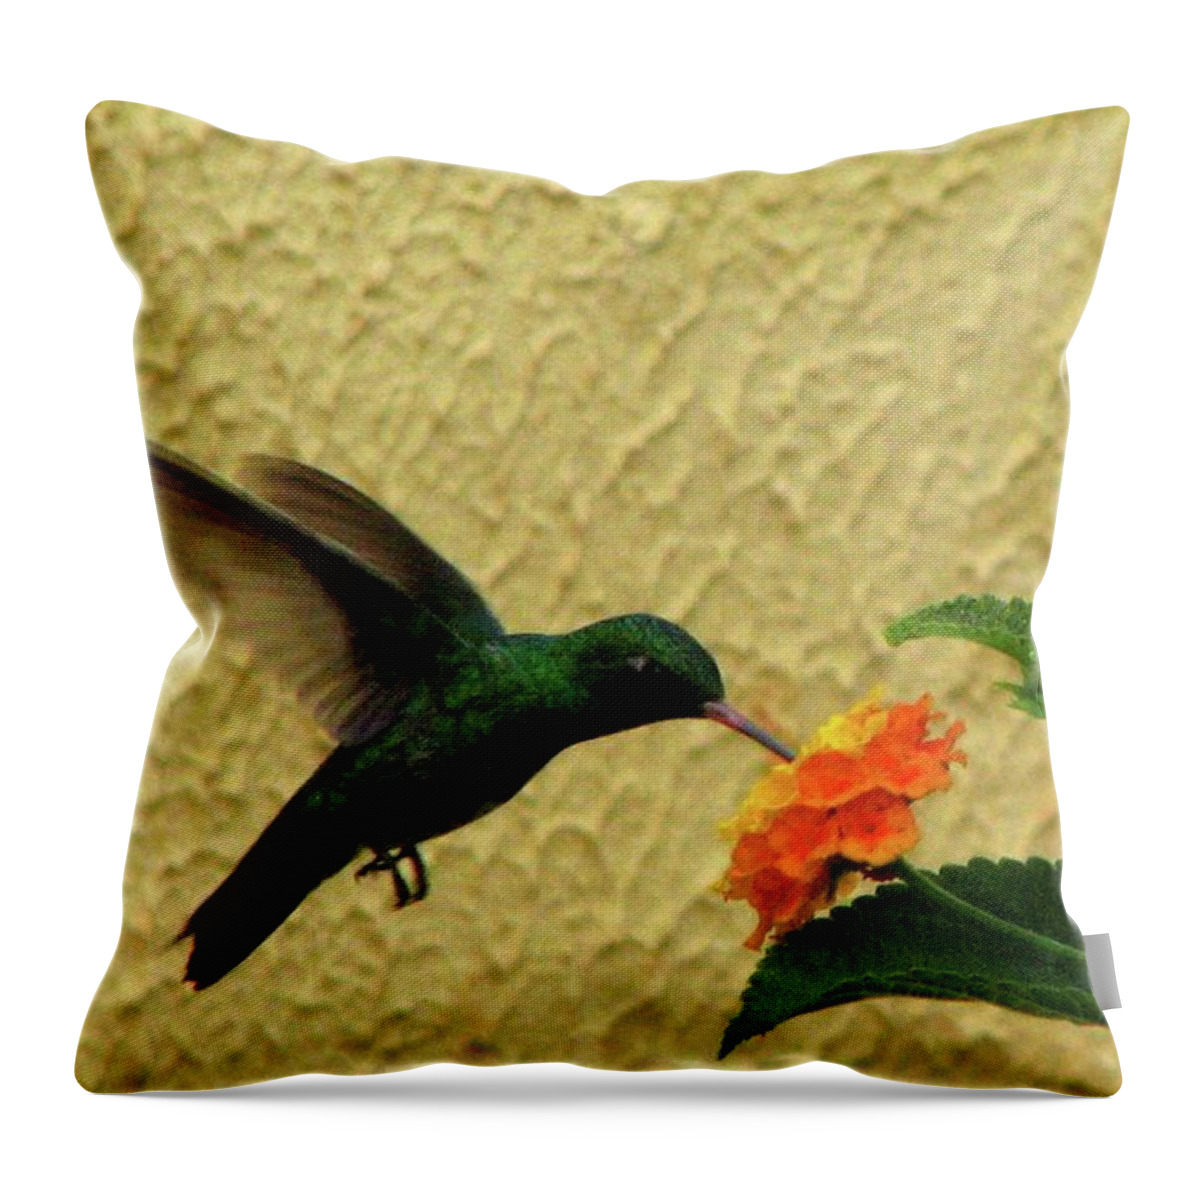 Animal Themes Throw Pillow featuring the photograph Hummingbird by Vi Lima